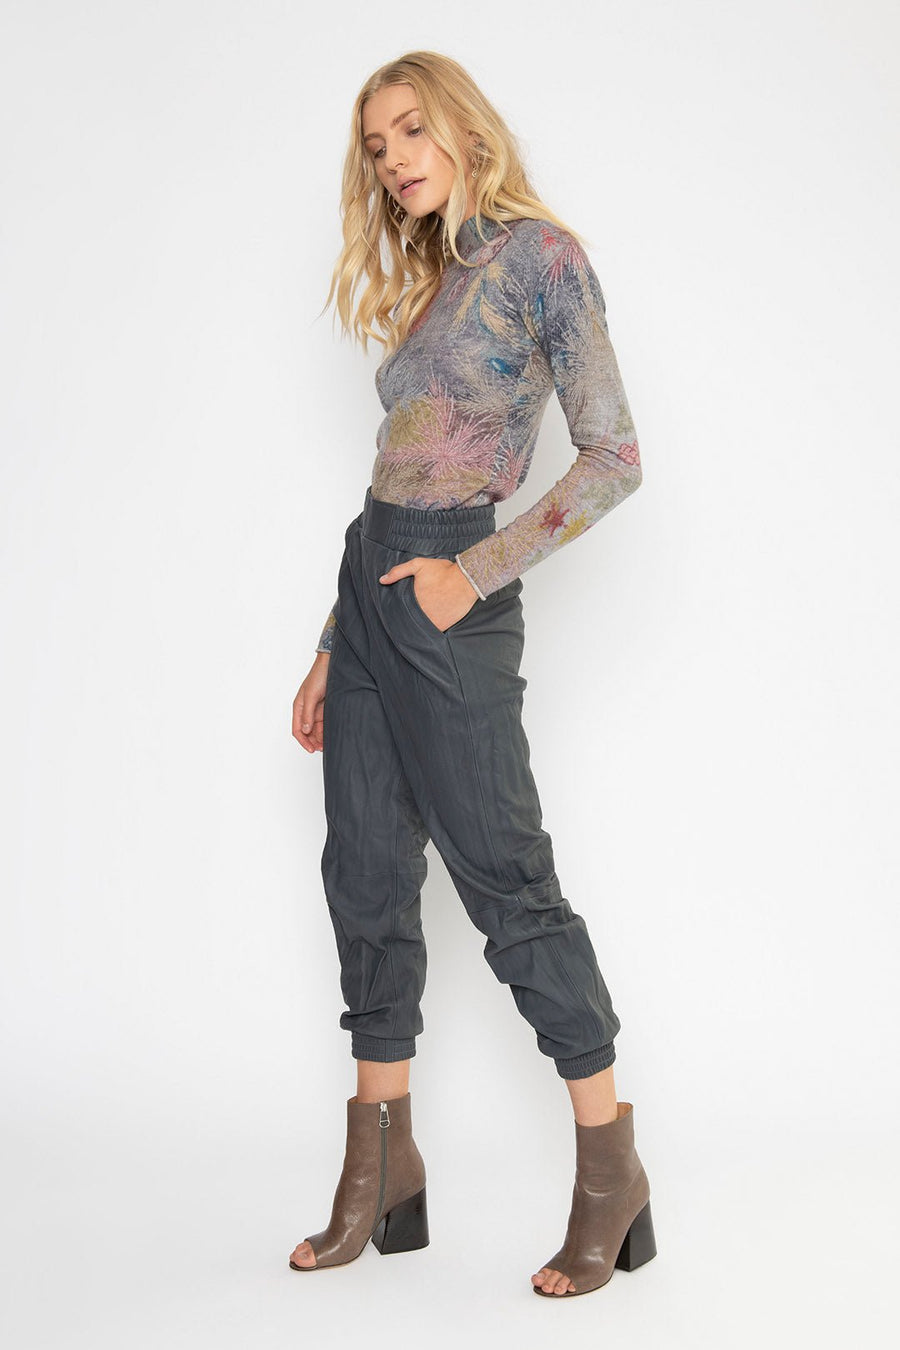 LEATHER JOGGER PANT, GRAPHITE - Burning Torch Online Boutique